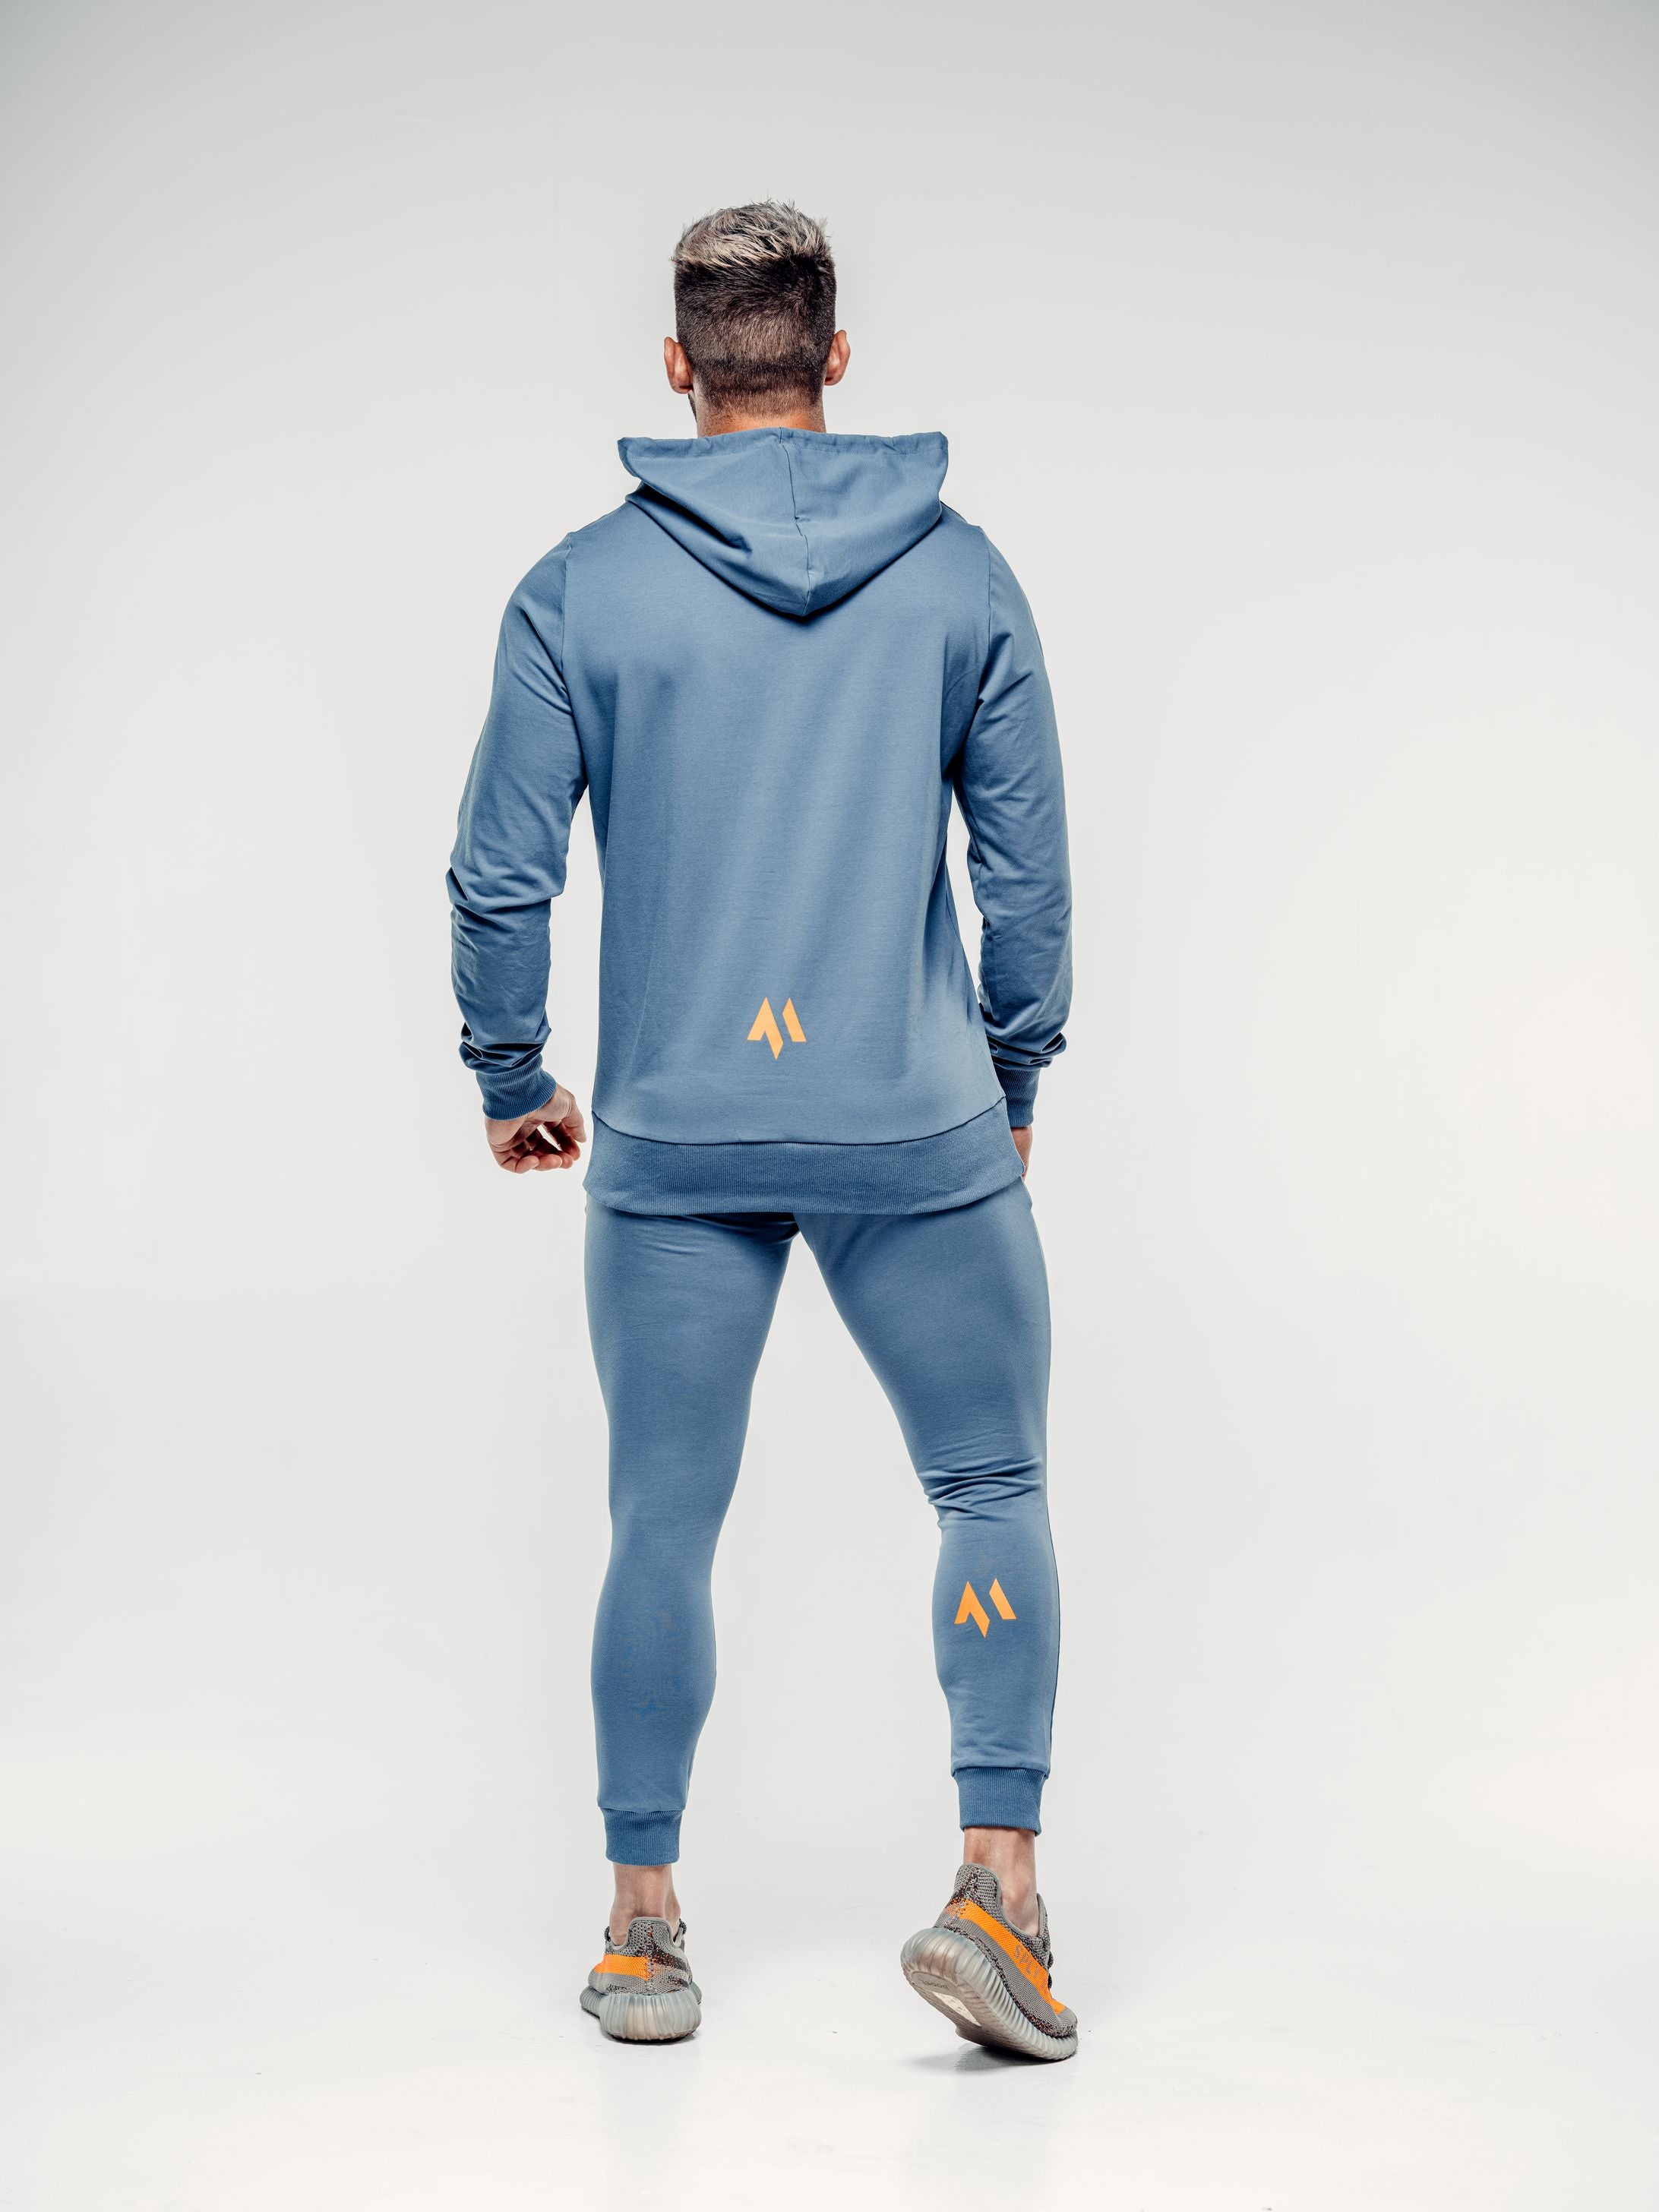 This is a rear view full body shot of Shane wearing the new standard hoodie in blue steel.  It shows the M emblem in signature orange in the lower middle of the back as well as on the back of Shane's calf.